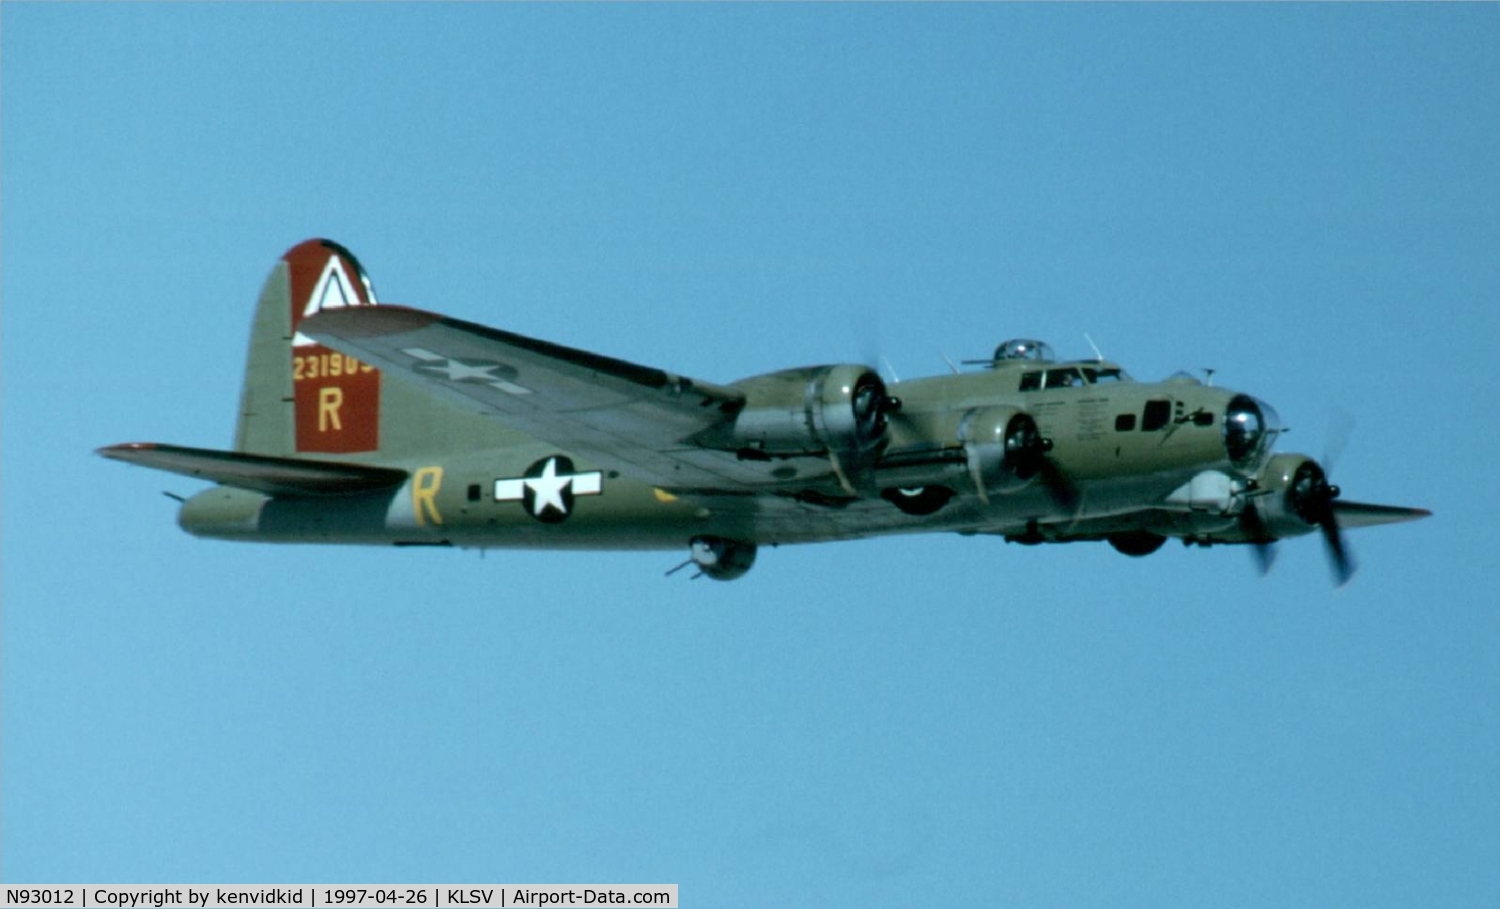 N93012, 1944 Boeing B-17G-30-BO Flying Fortress C/N 32264, At the 1997 50th Anniversary of the USAF air display, Nellis AFB.